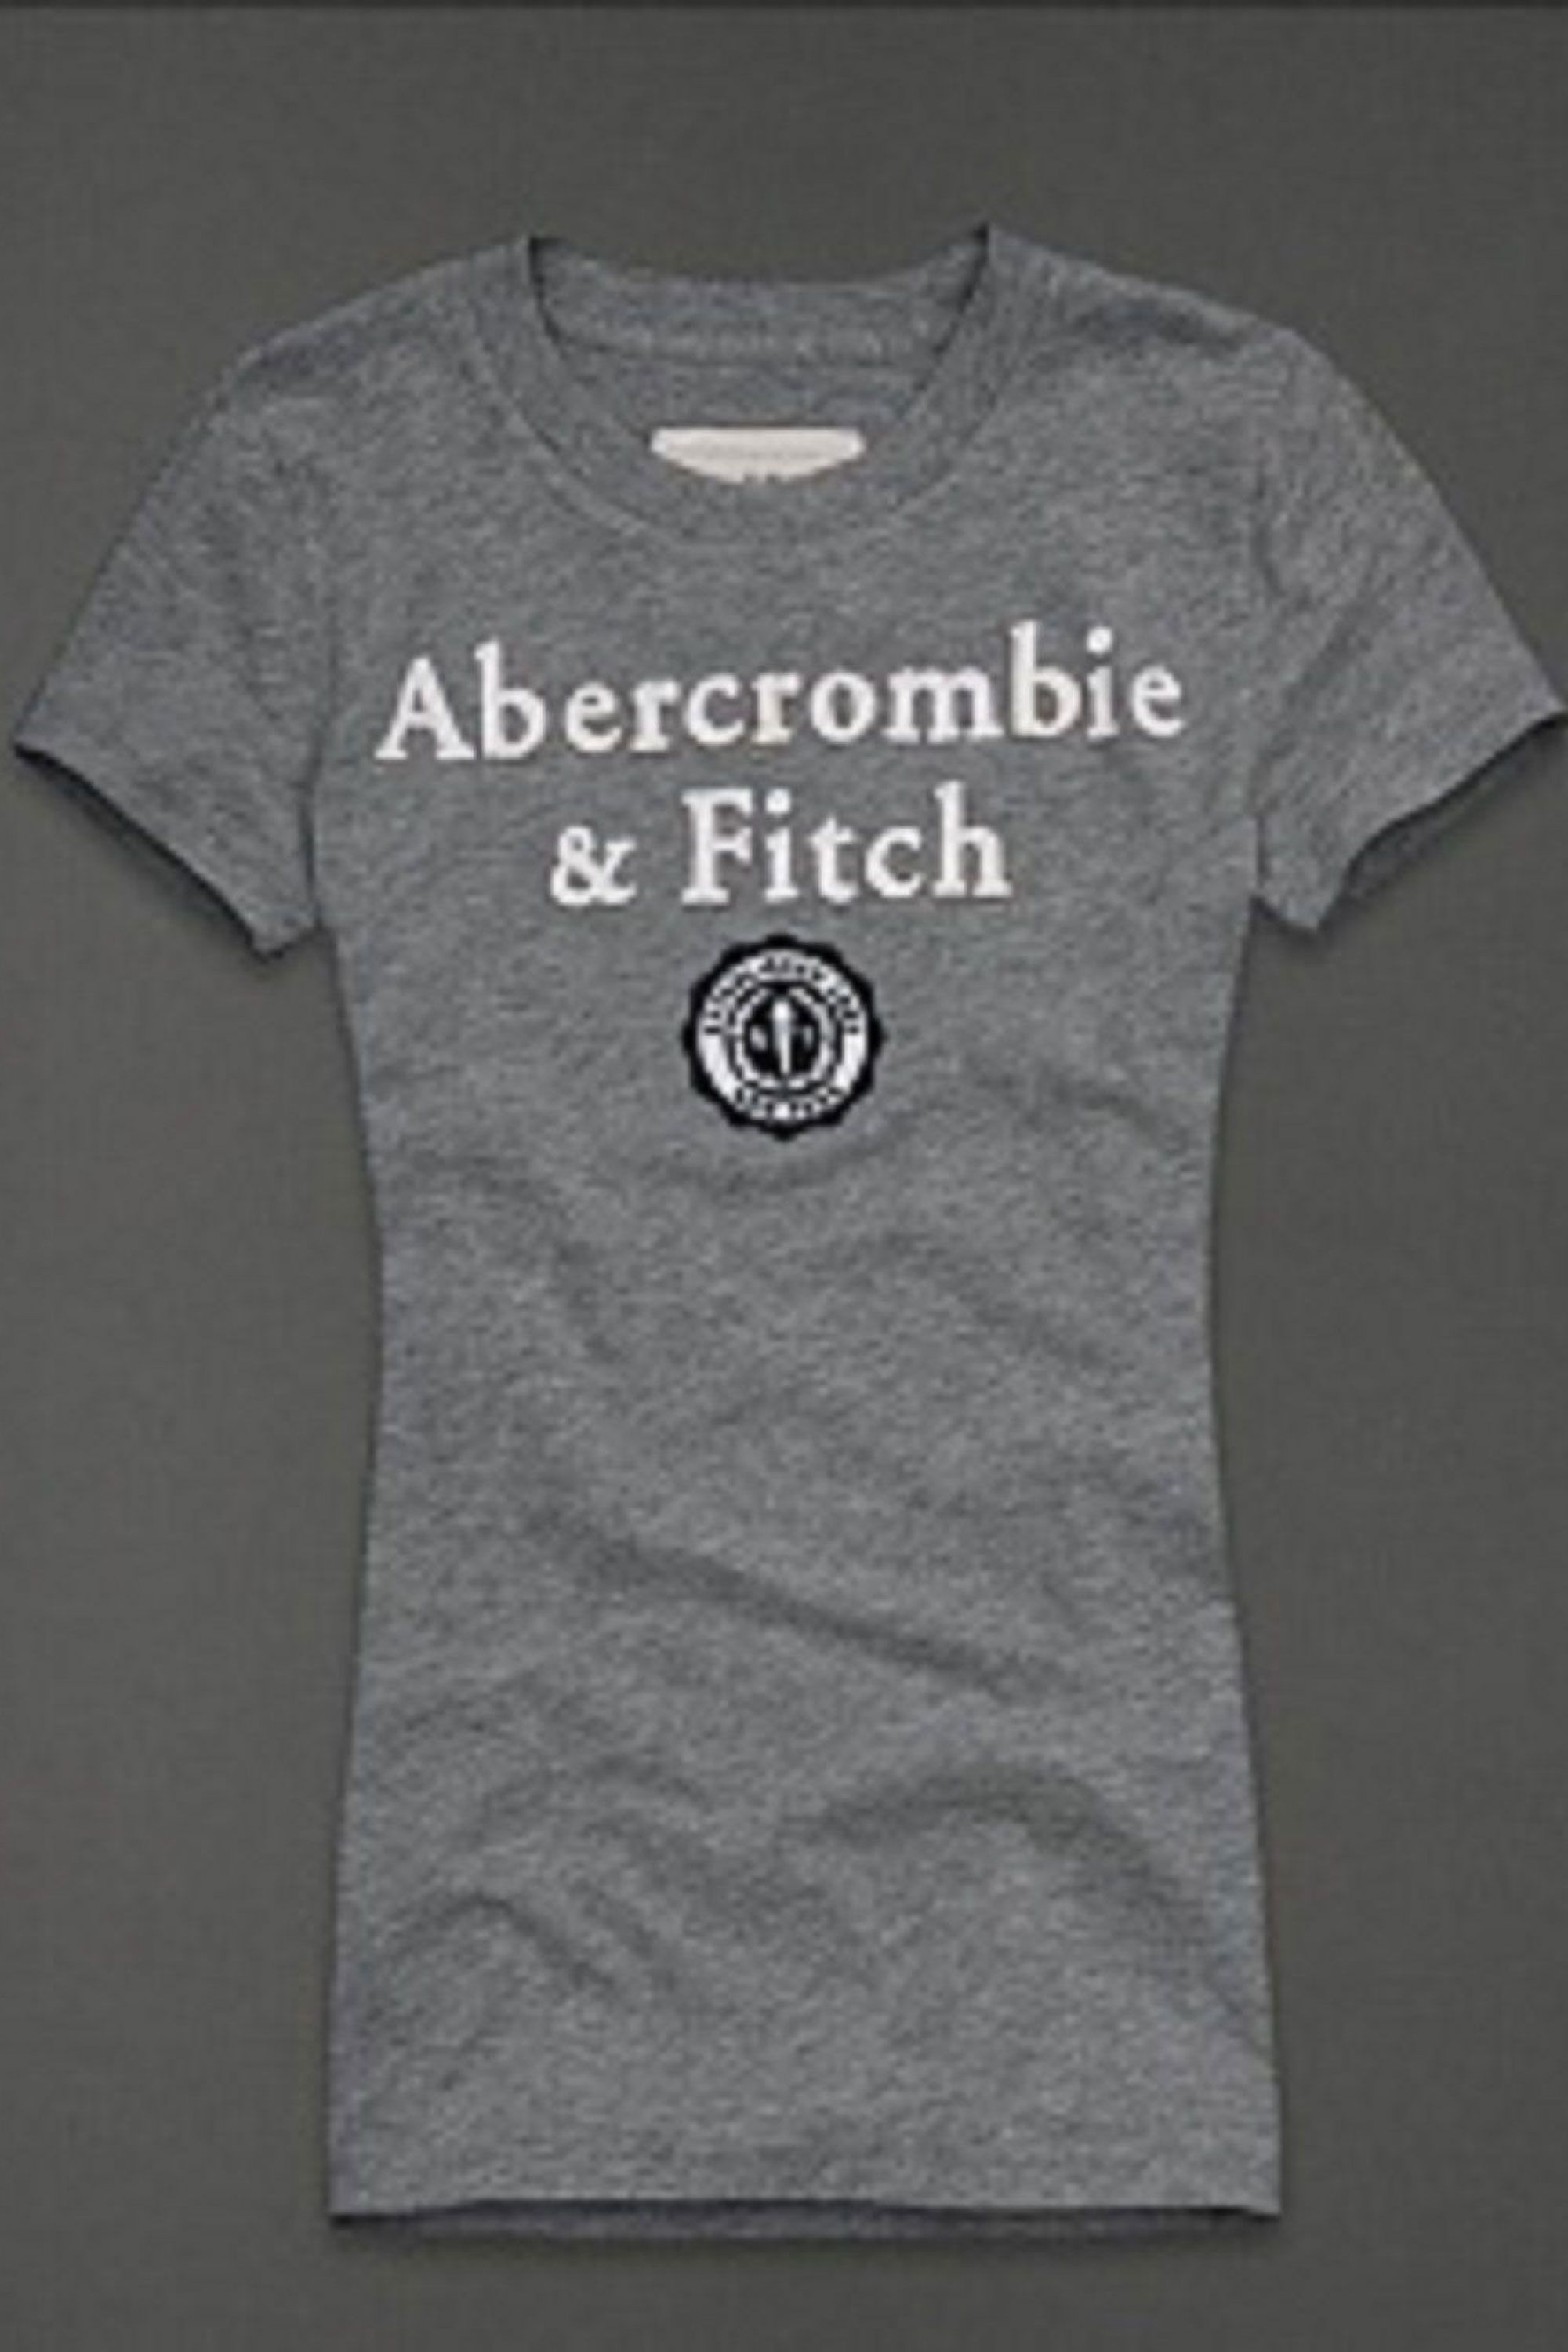 a&f clothing online